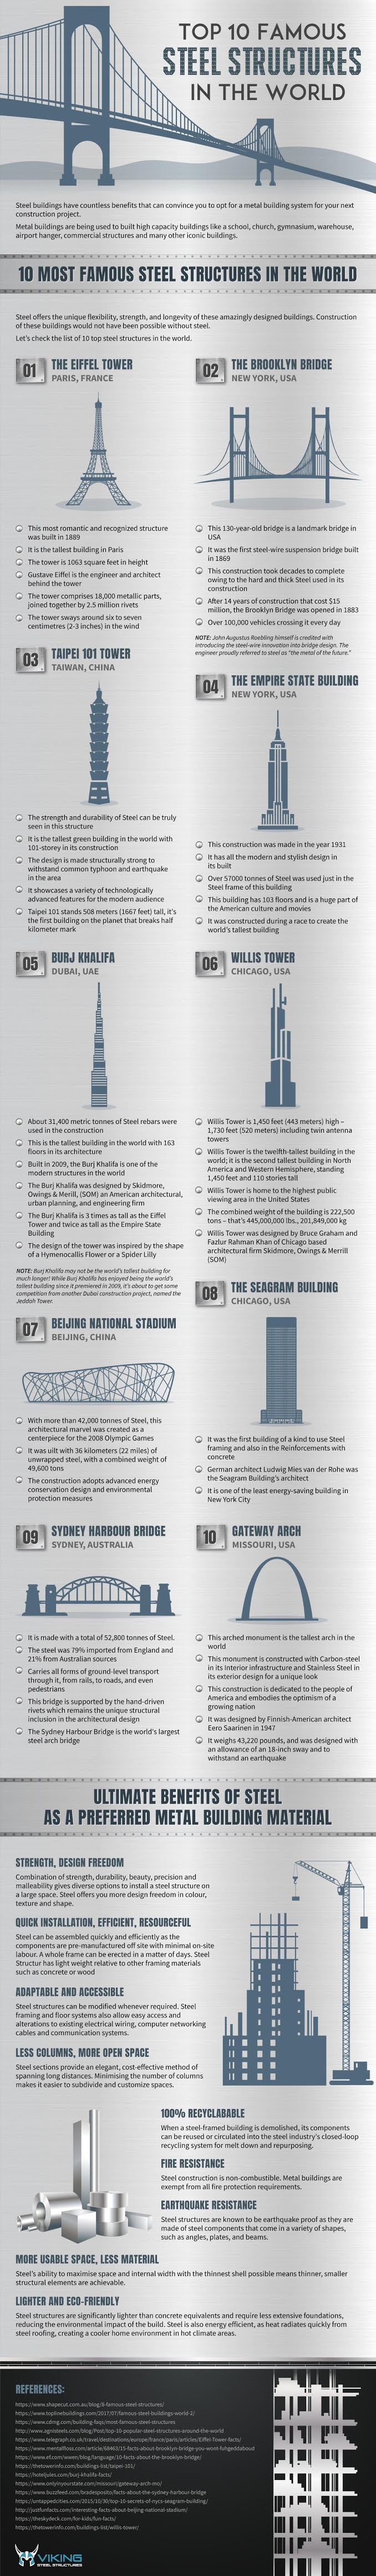  Top 10 Famous Steel Structures in The World #infographic